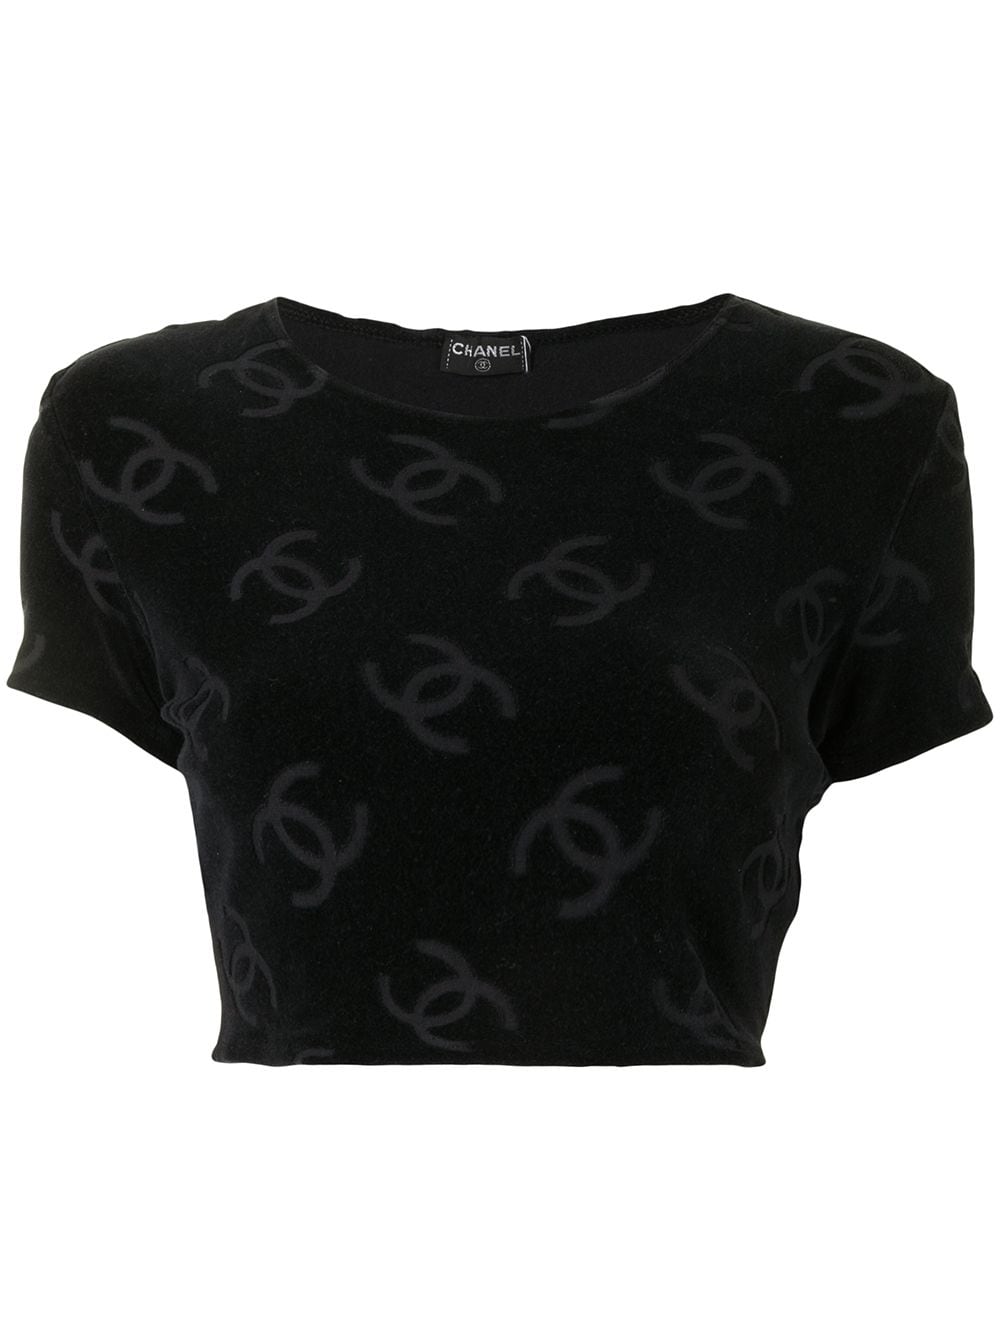 CHANEL Pre-Owned 1990s interlocking CC logo cropped top - Black von CHANEL Pre-Owned